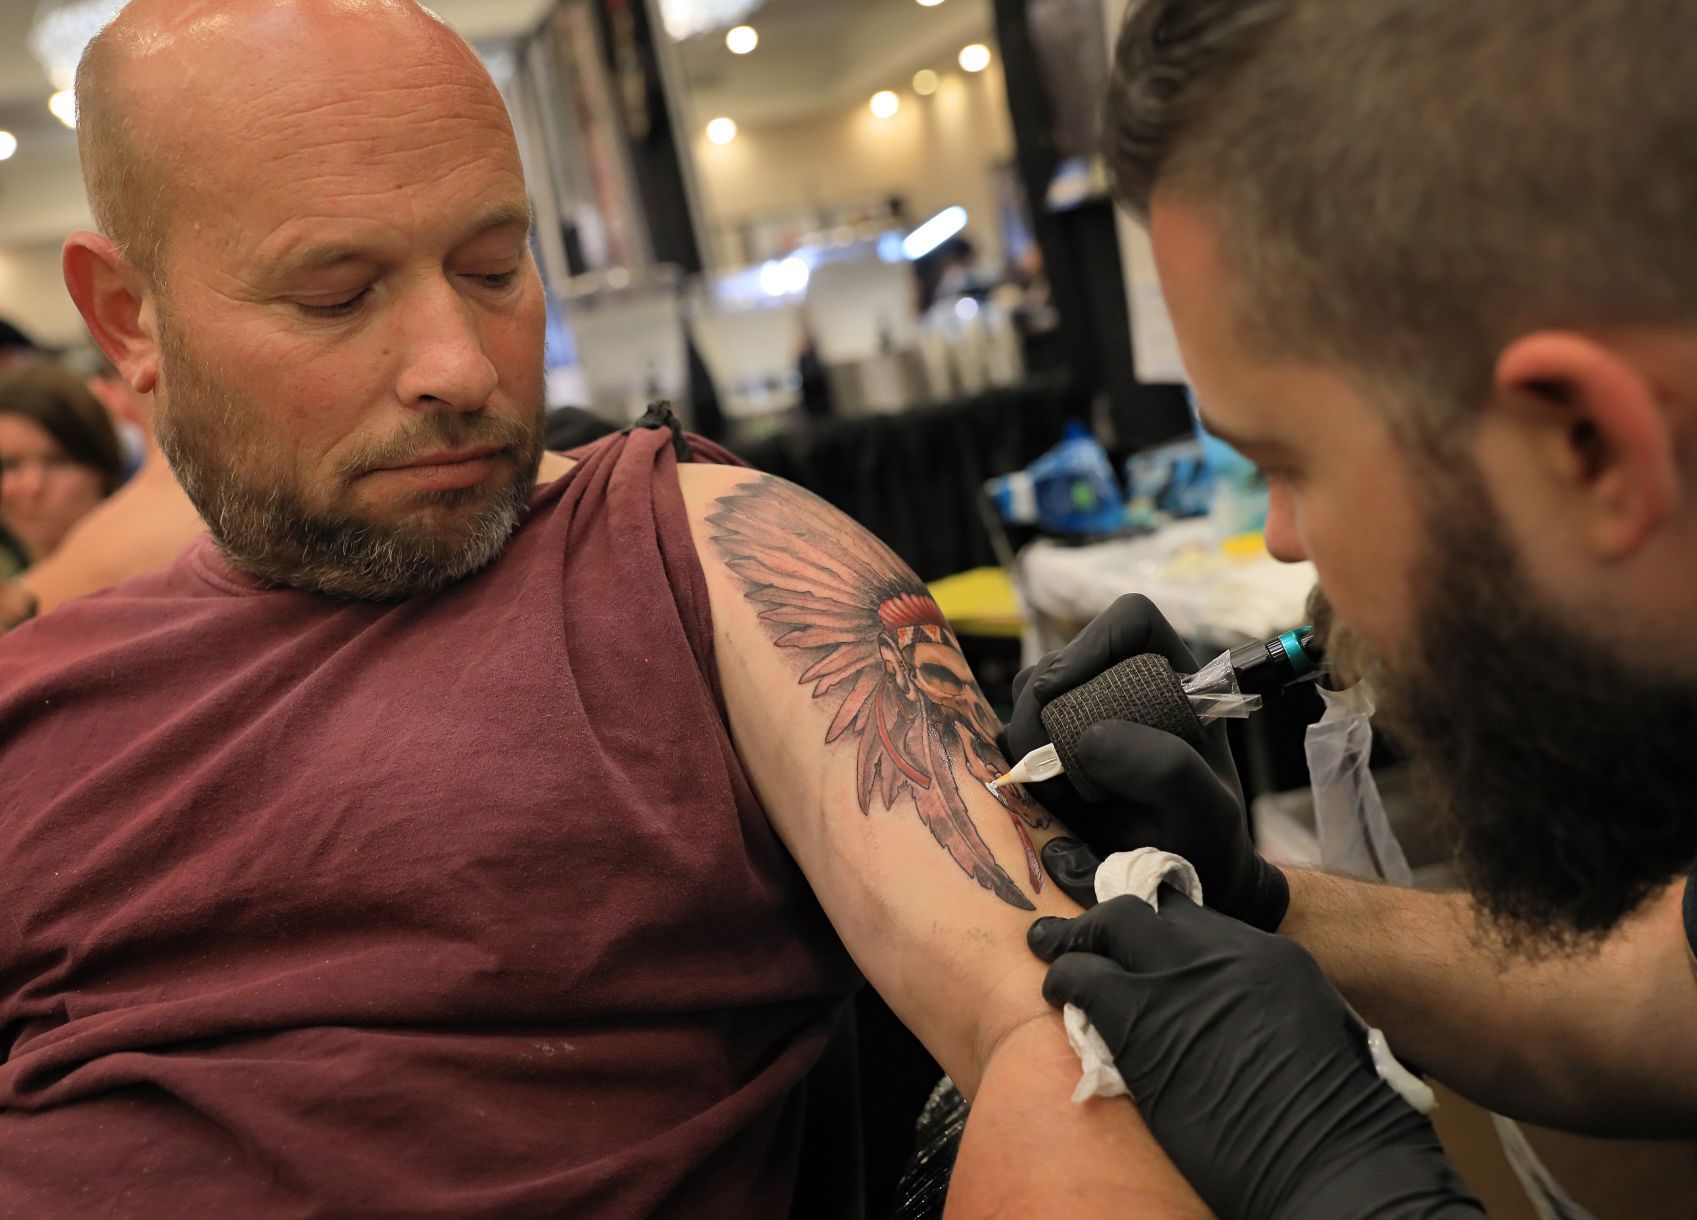 Tattoo artists and ink enthusiasts gather in St Louis for annual convention